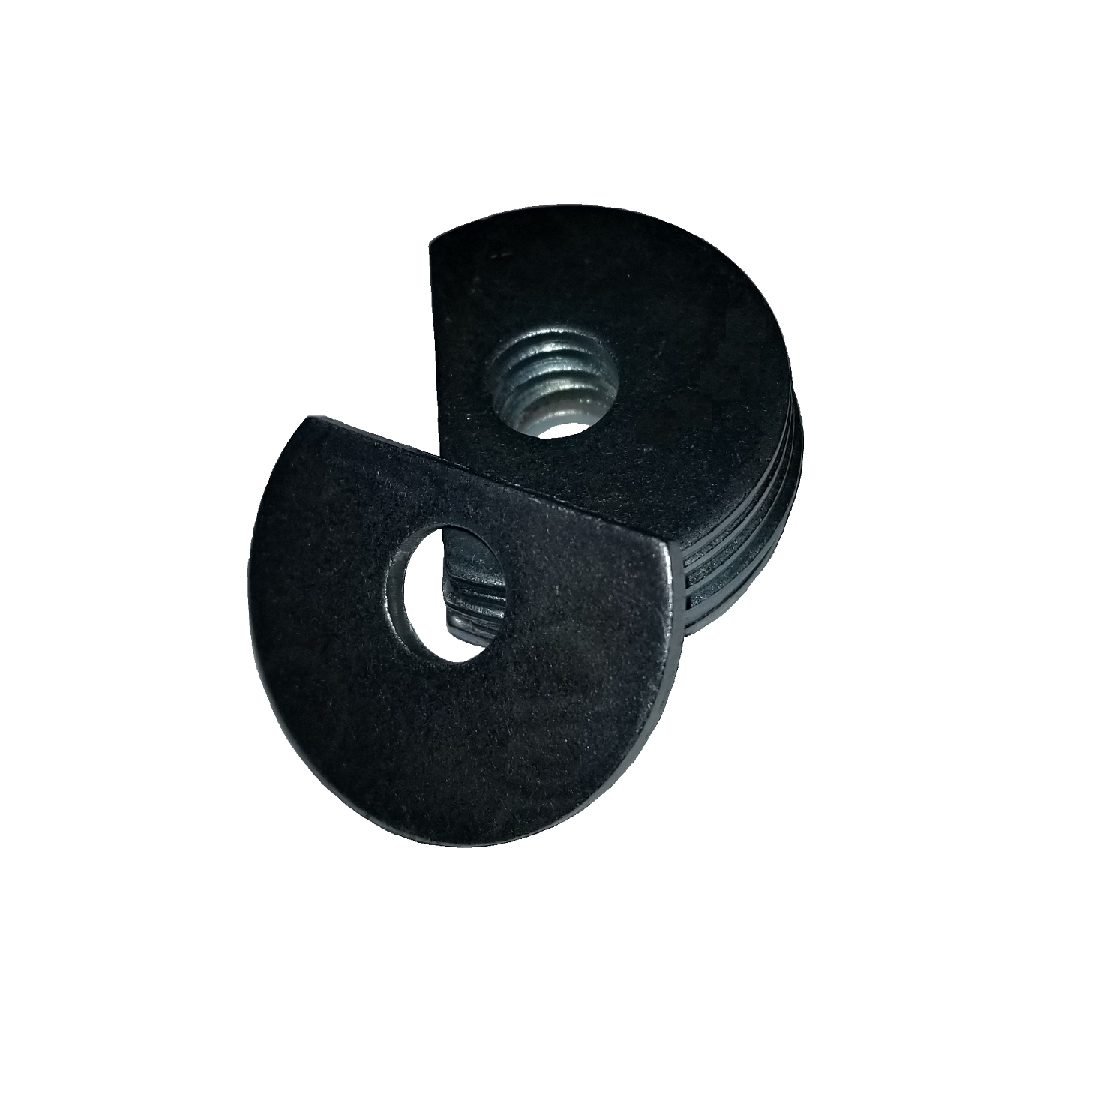 Clipped OD Washer - 1.784 ID, 4.250 OD, 0.065 Thick, Low Carbon Steel - Soft